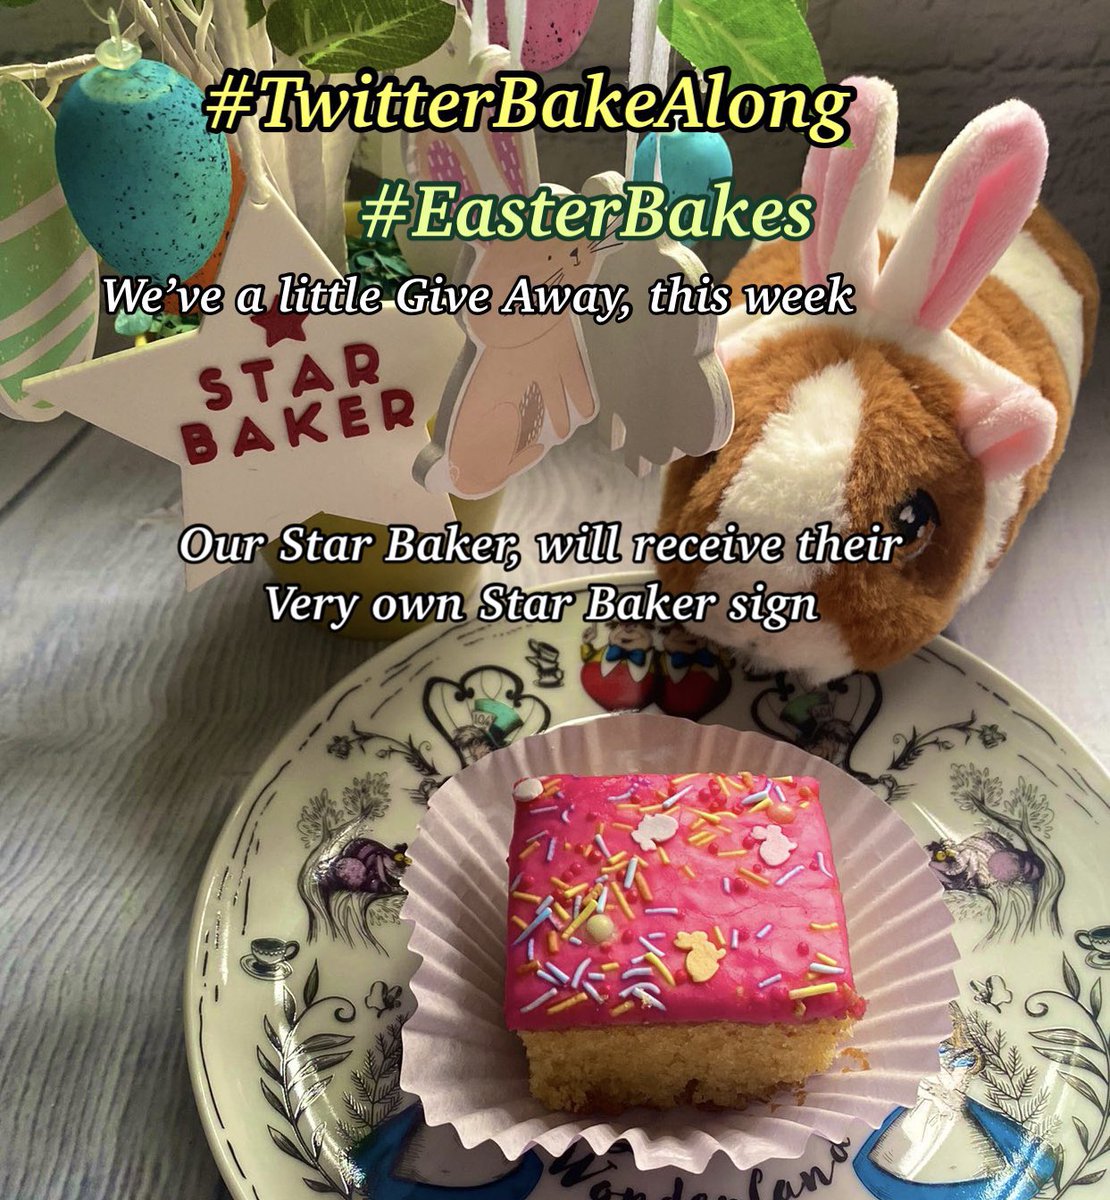 We’re back 😍 and as promised we are kicking off with #EasterBakes 🐣we have a little gift up for grabs for our #StarBaker 🎉so don’t forget those handwritten dated notes 😊oh and keep your 👀 peeled later in the week for details of a #twitterbakealong live this weekend 😍